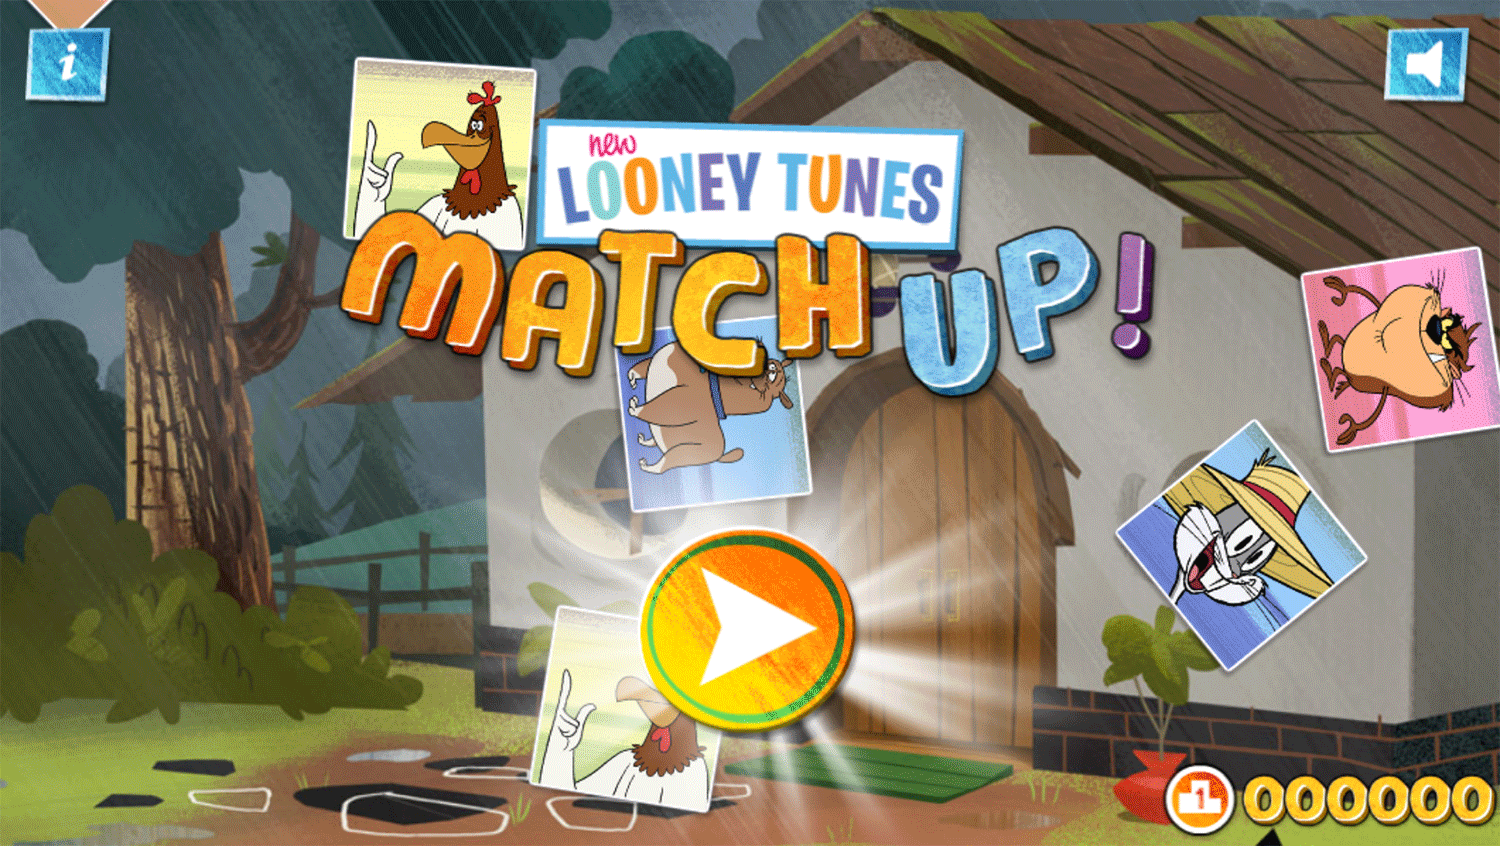 New Looney Tunes Match Up Game Welcome Screen Screenshot.